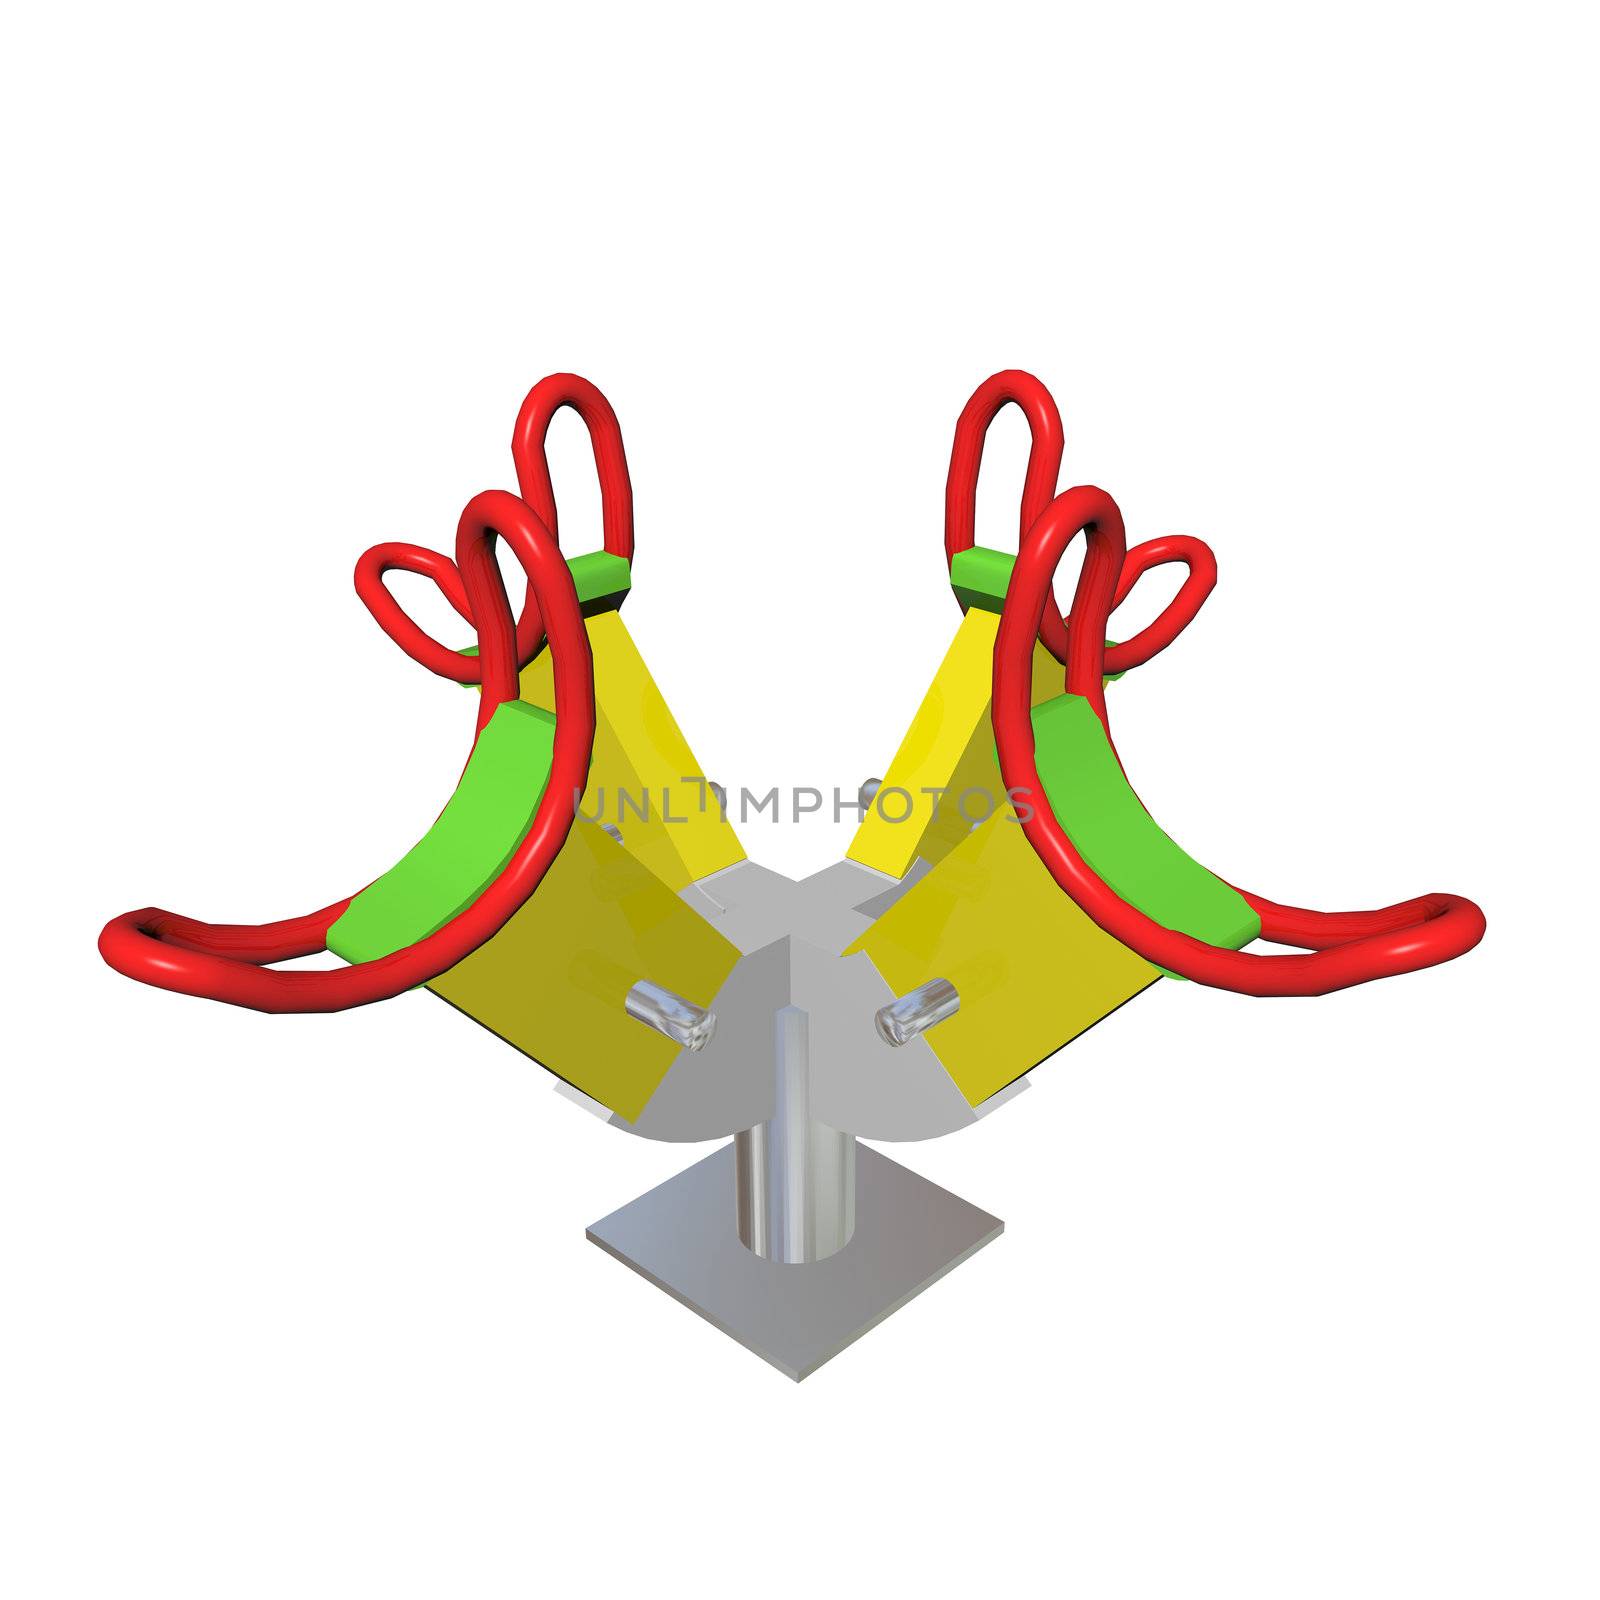 Red, green and yellow four-person children see-saw, 3D illustration, isolated against a white background